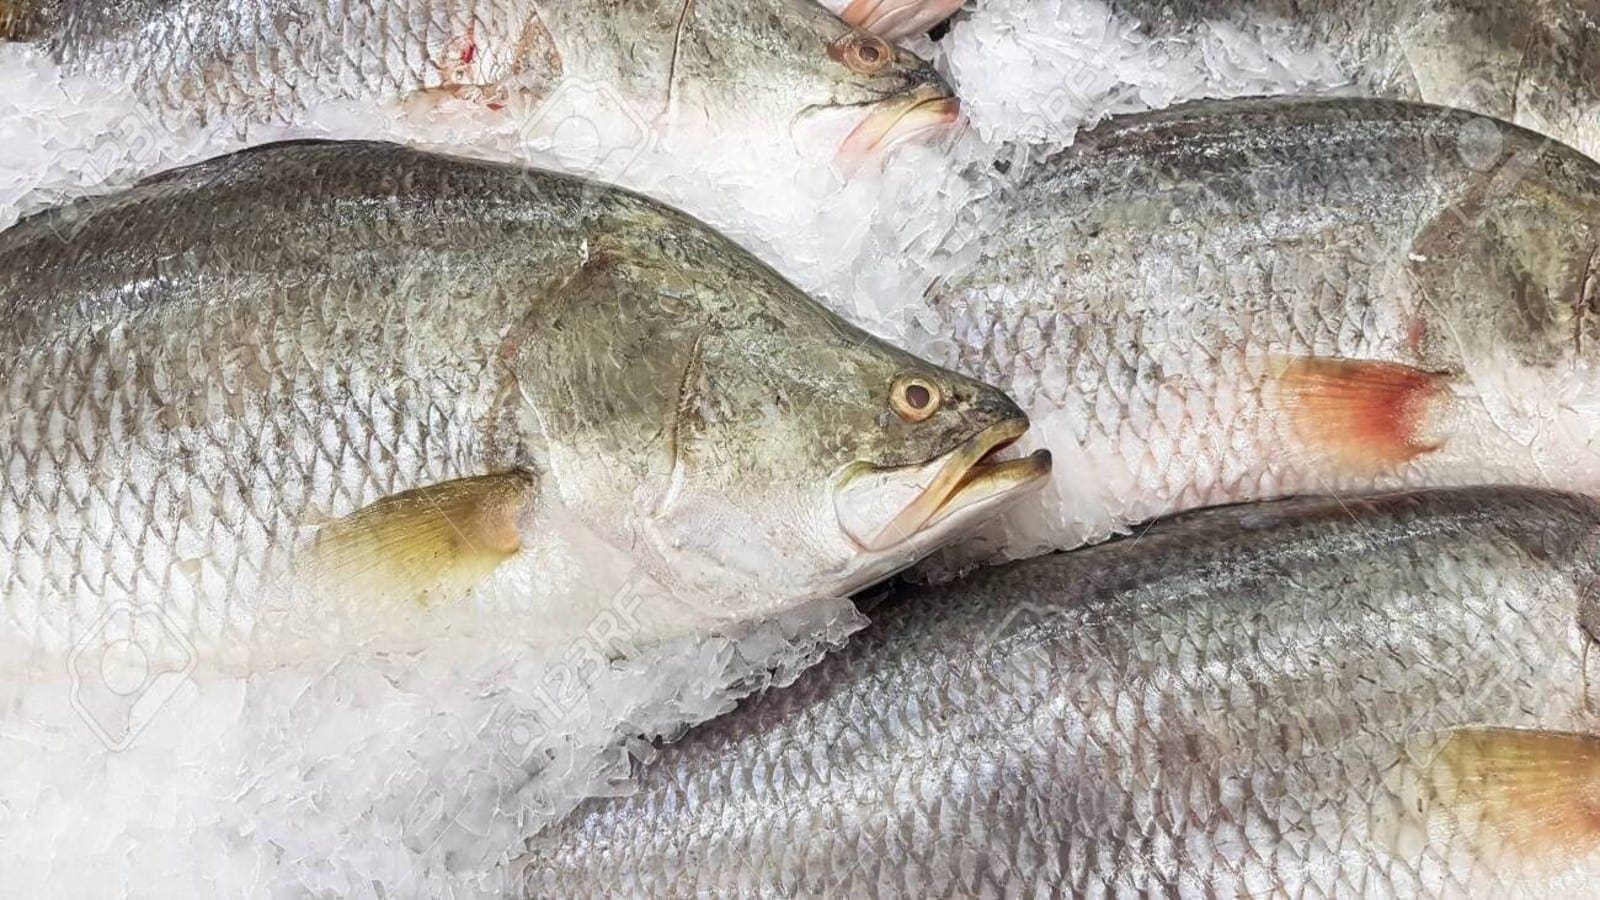 Researchers develop natural edible coating to prolong shelf life of seabass fillets